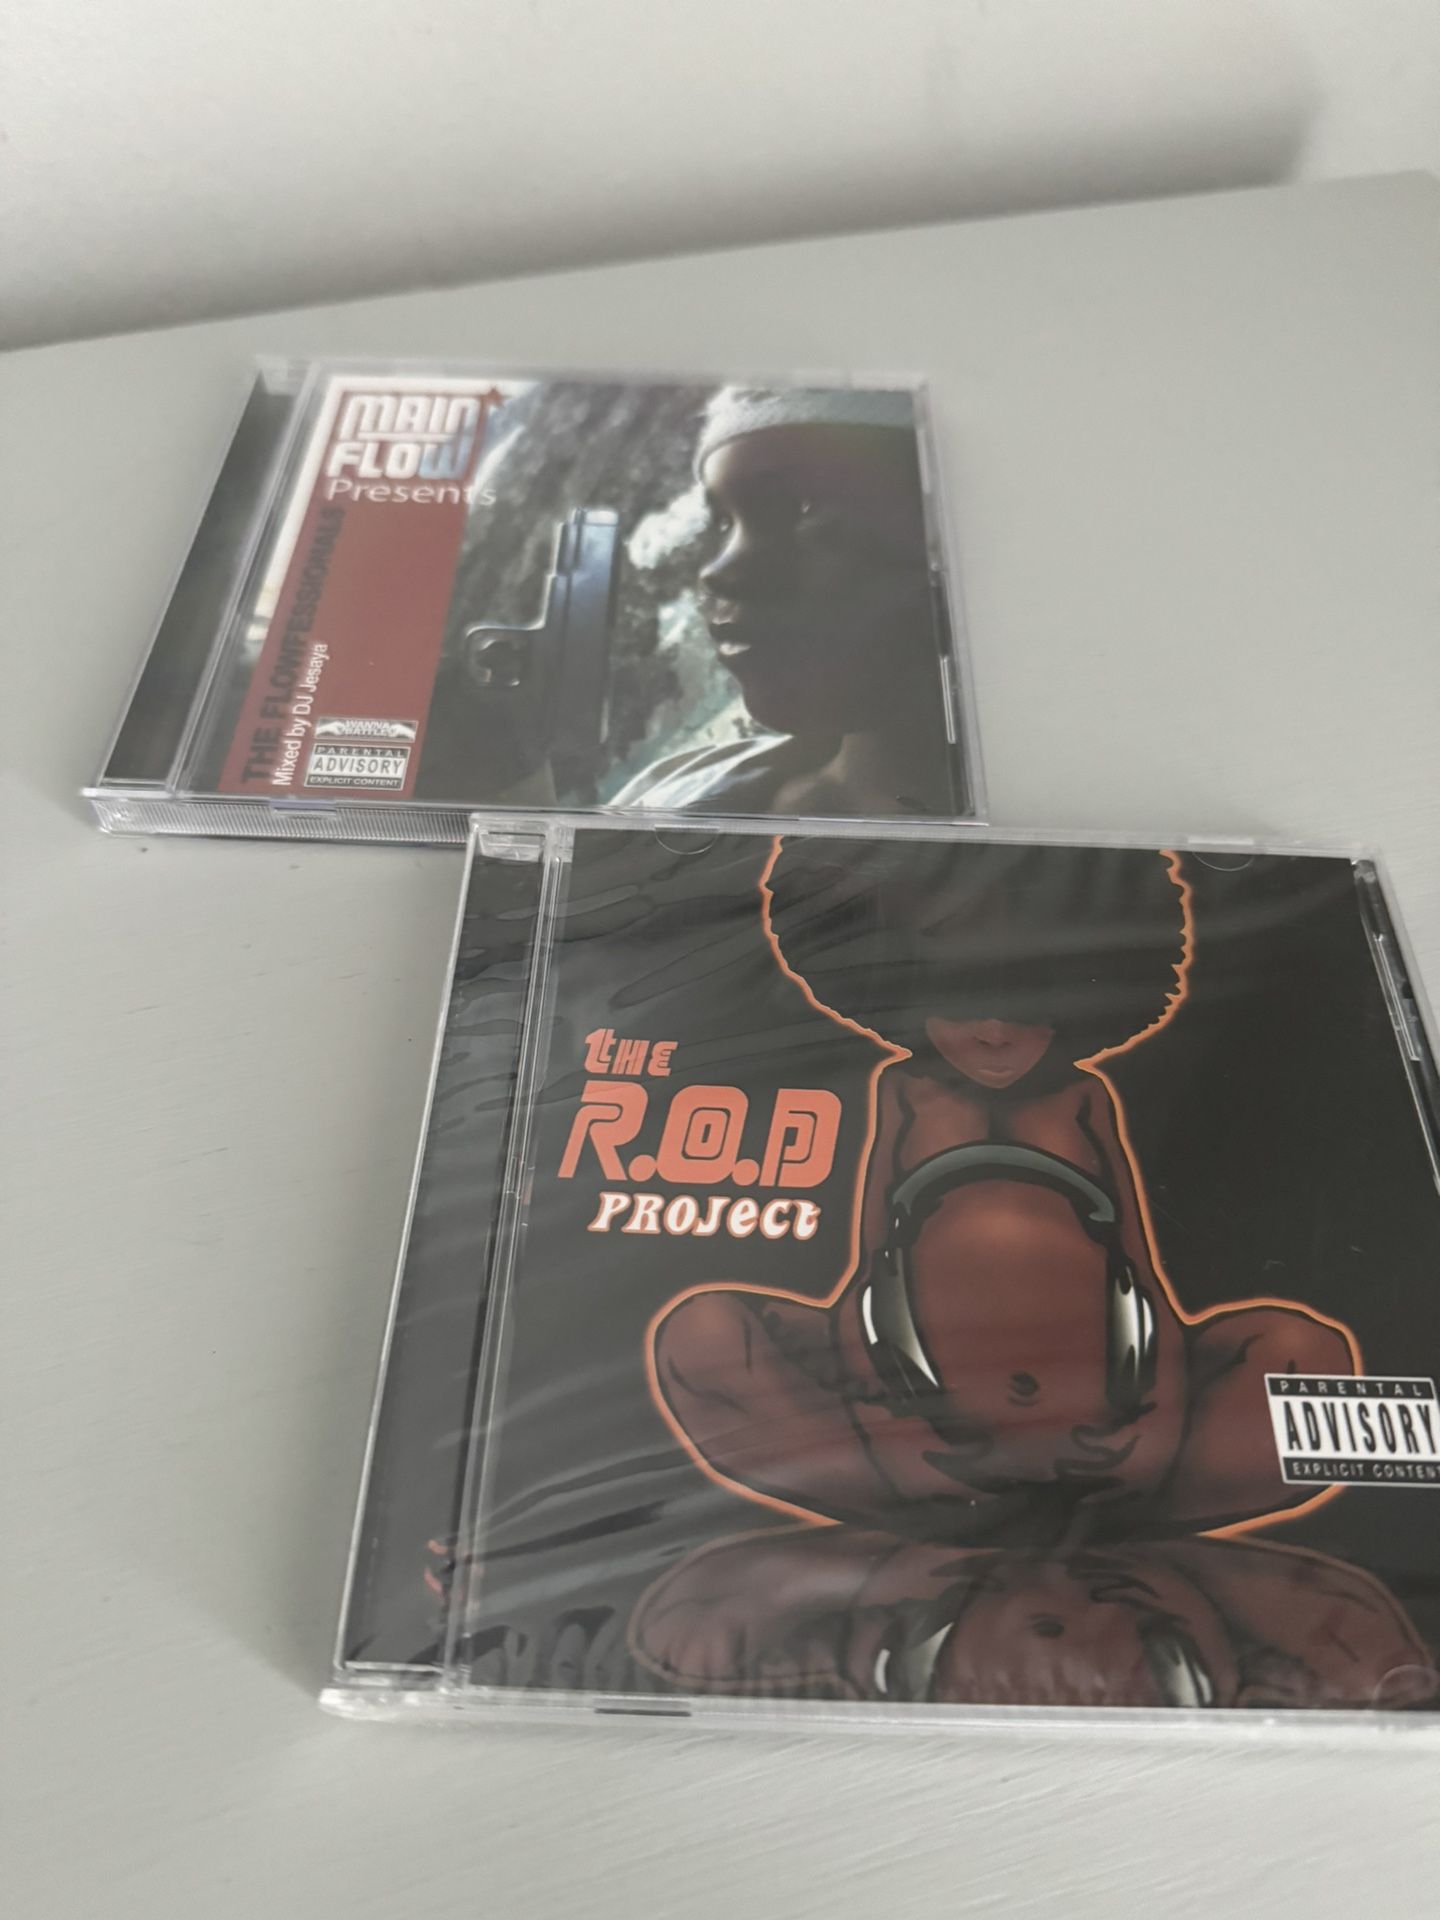 Two CDs.  New.  Unopened.  R.O.D Proj 